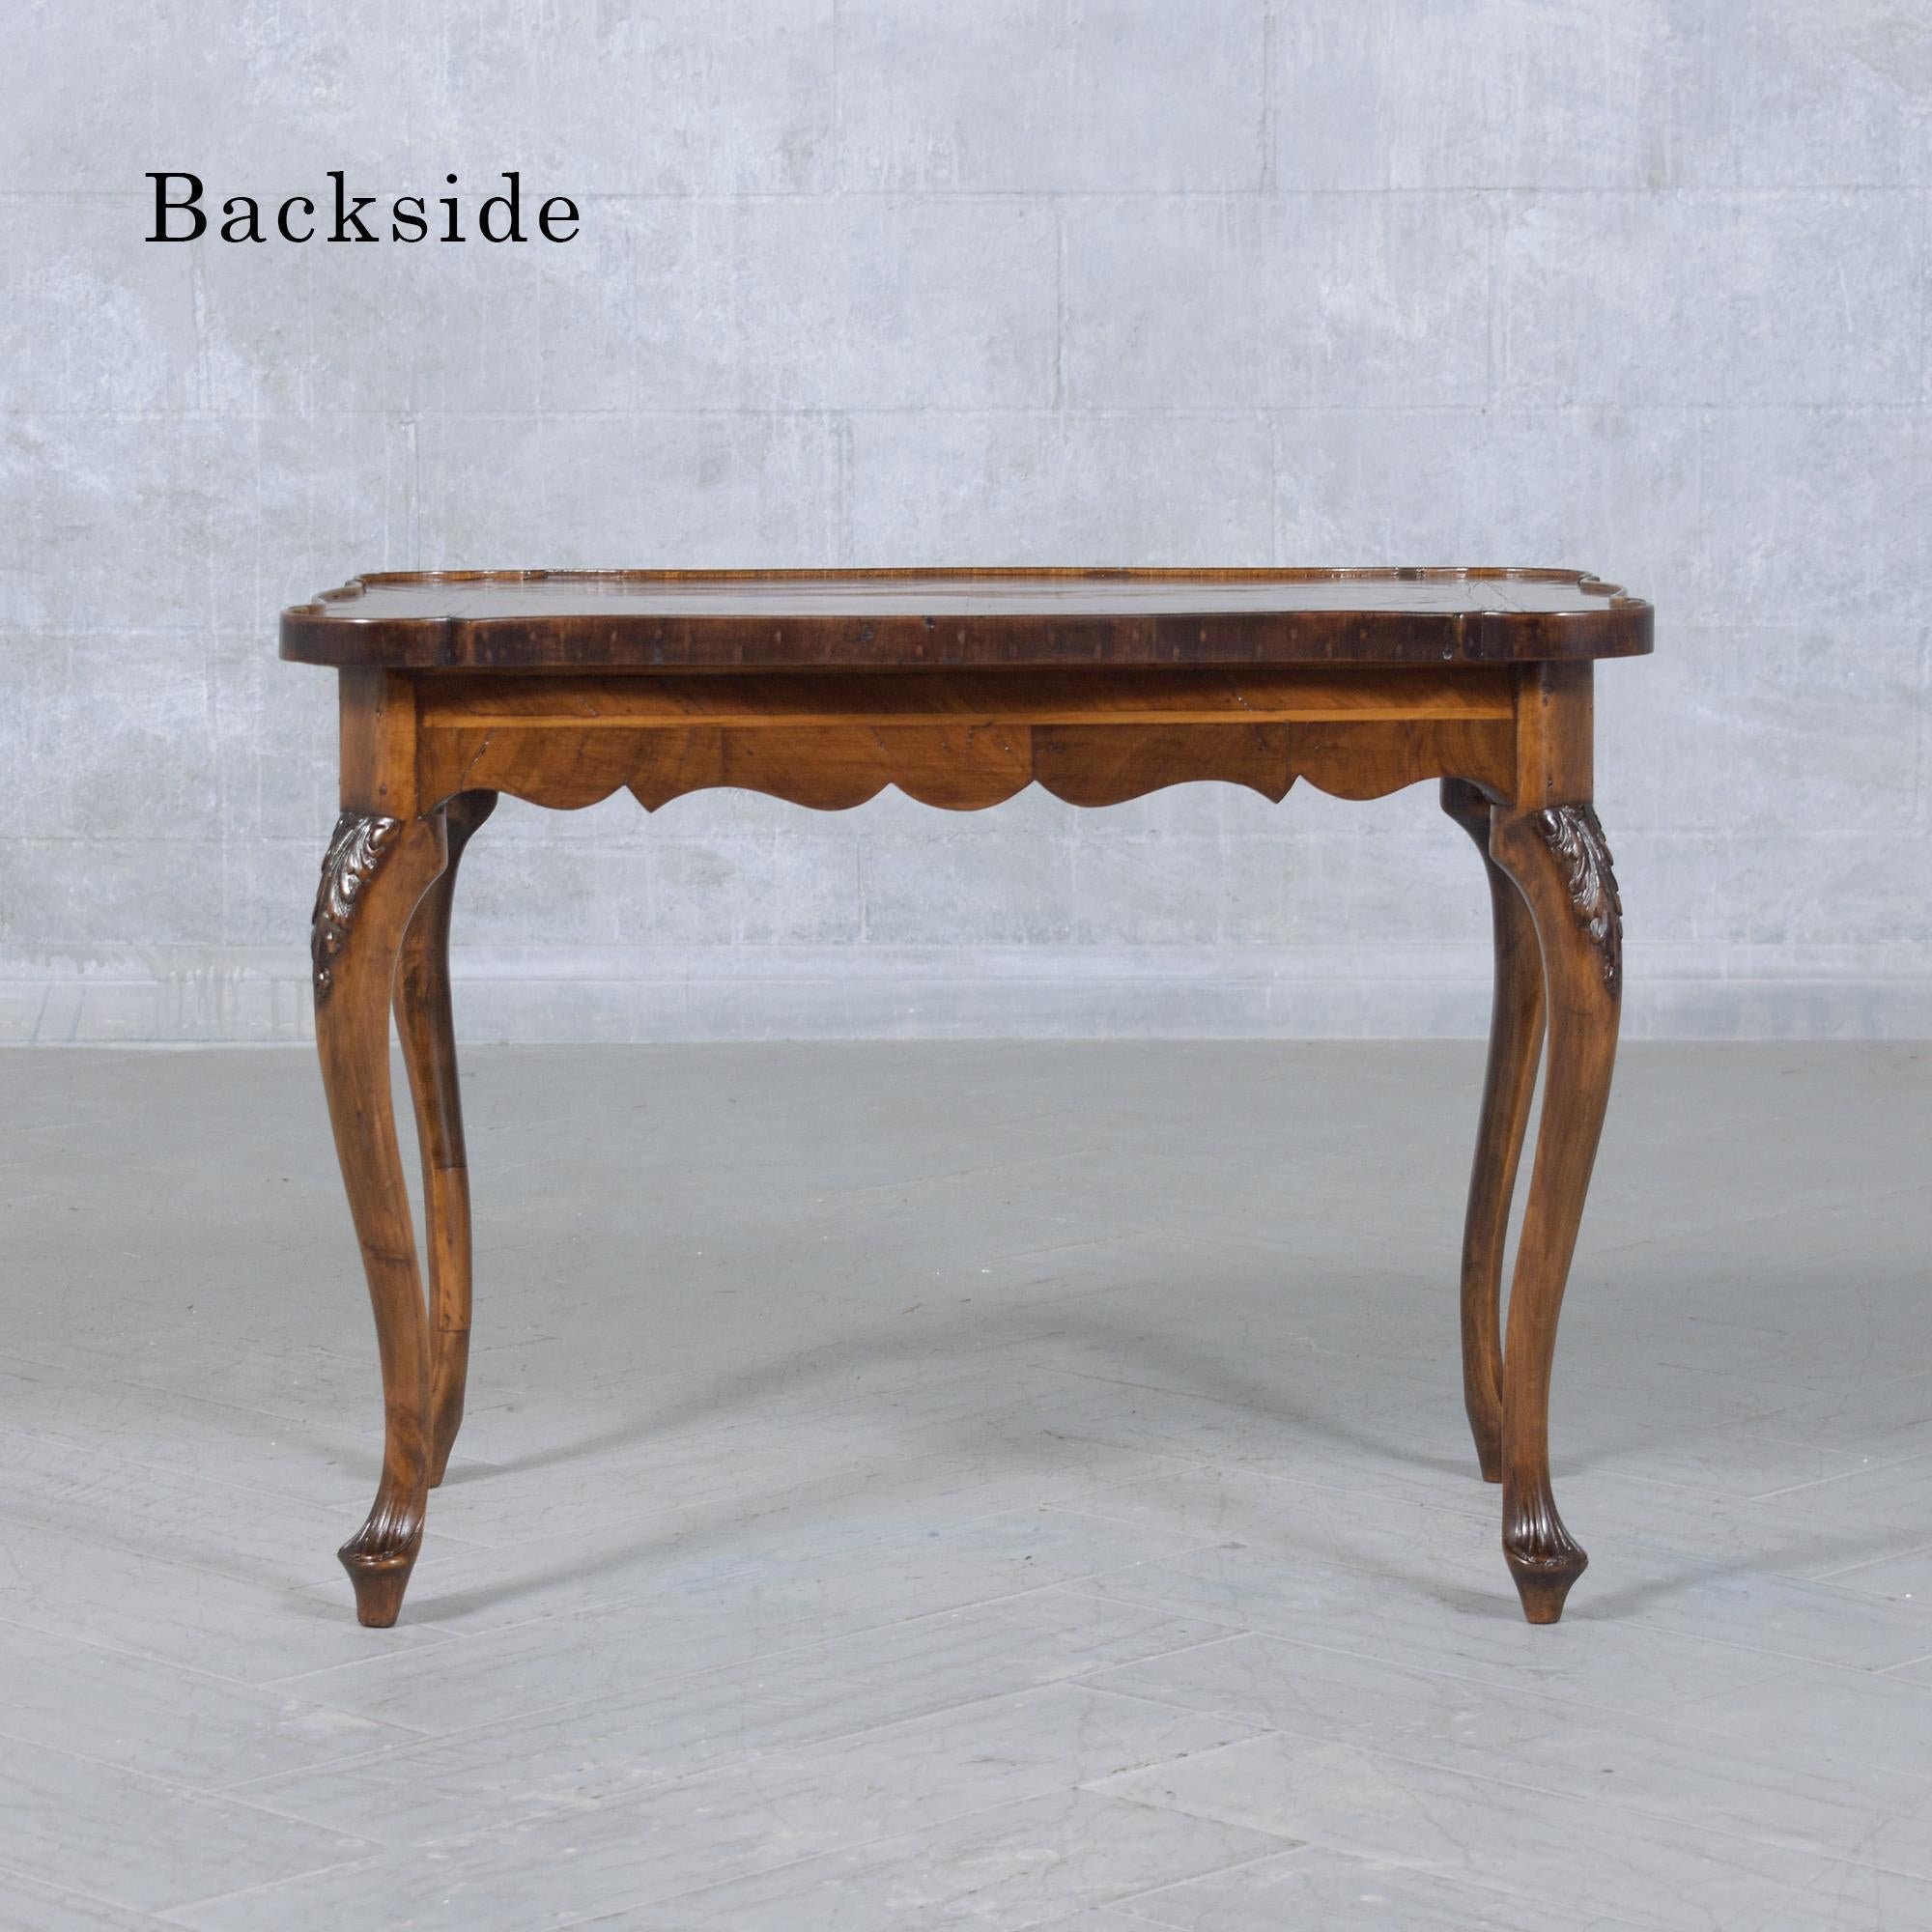 Lacquer Late 19th-Century English Walnut Side Table with Inlaid Pattern For Sale